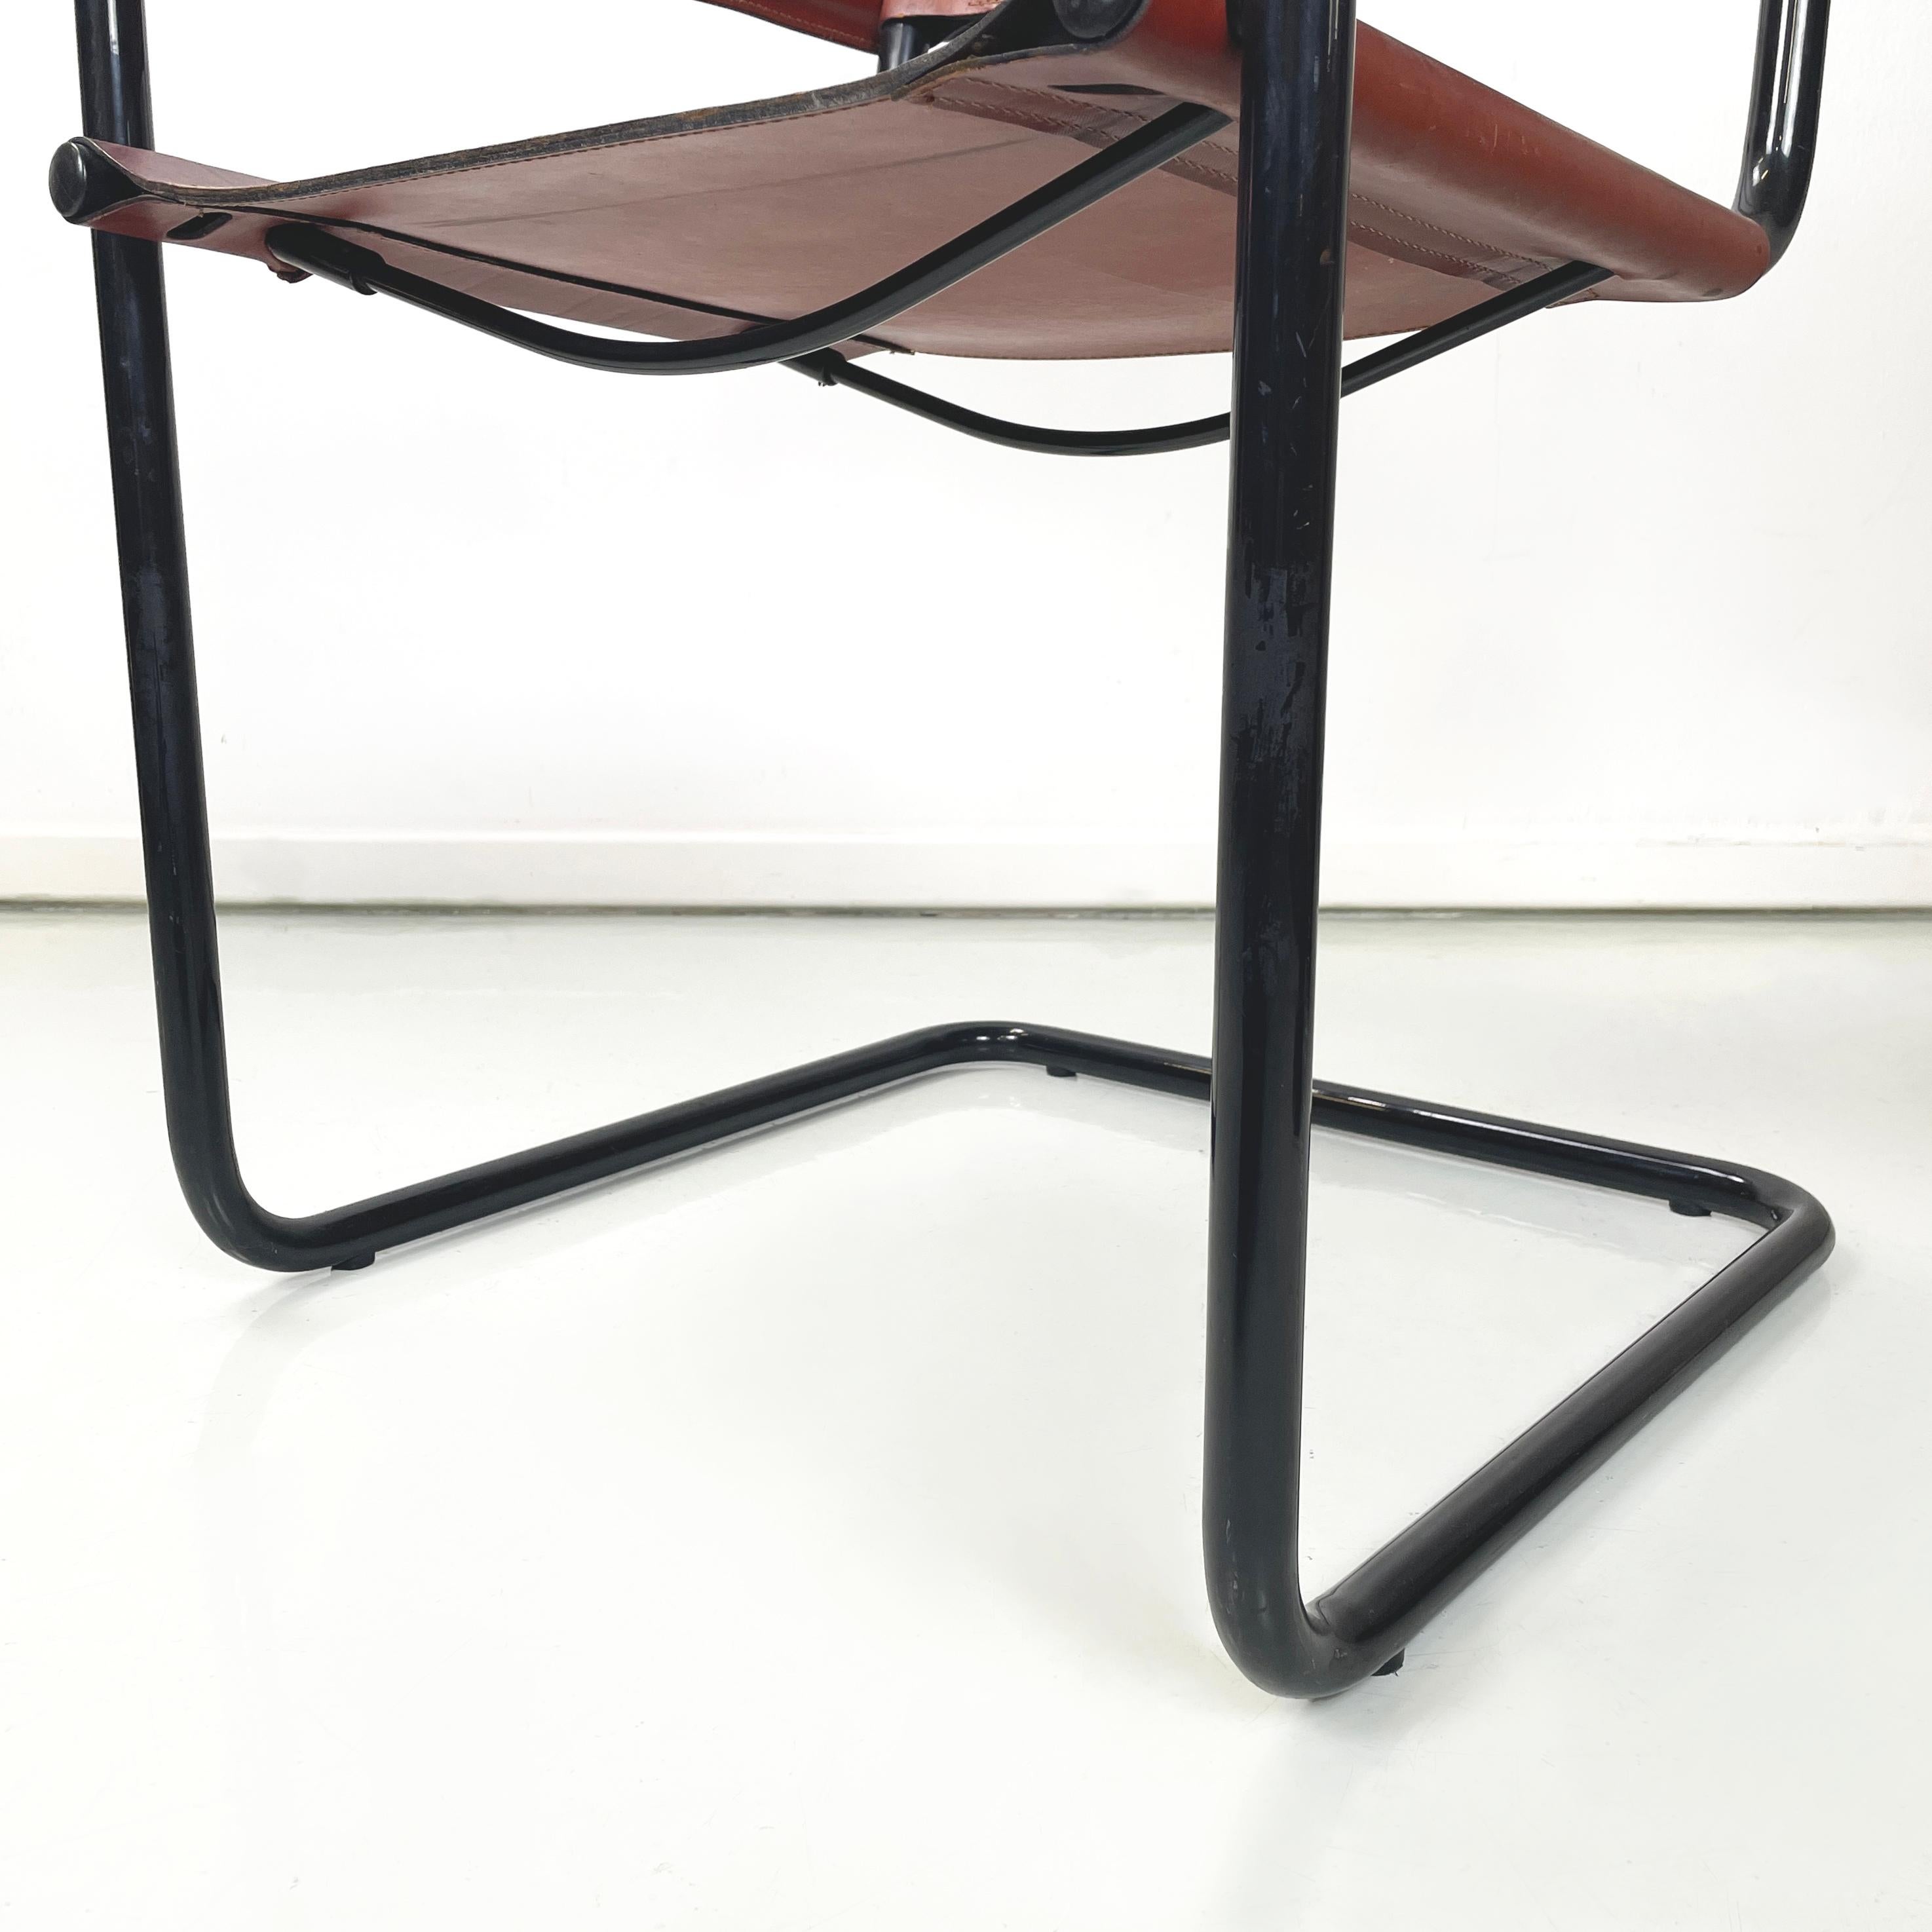 Italian modern Brown dining chair MG5 by Marcel Breuer and Mart Stam for Matteo Grassi, 1970s
Chair mod. MG5 with backrest and seat made of a brown leather band. The structure is in black painted metal tubing. The armrests are also covered in brown